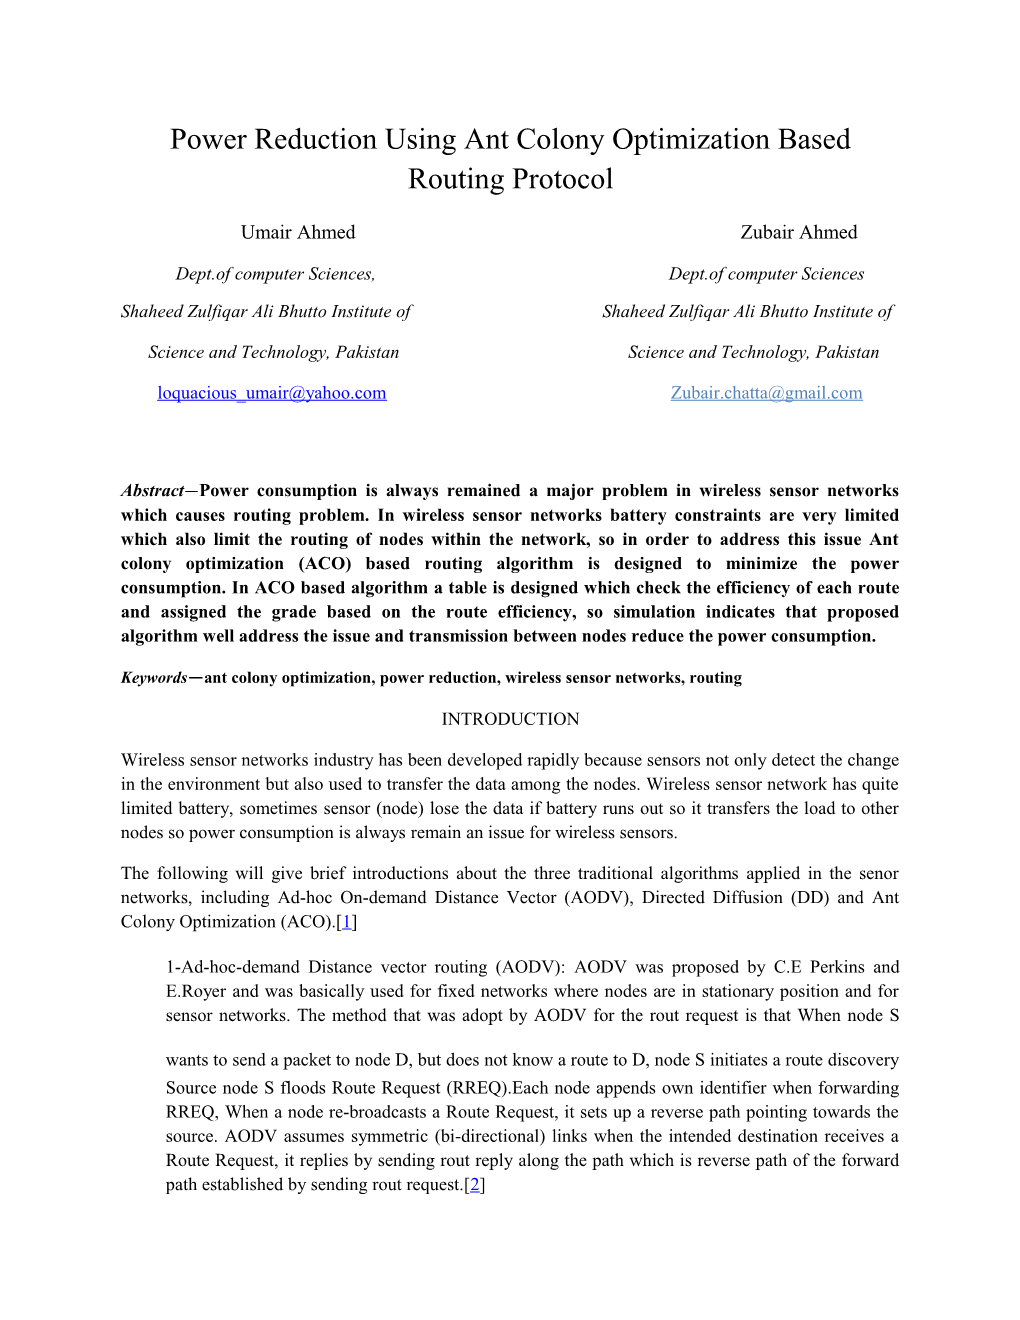 Power Reduction Using Ant Colony Optimization Based Routing Protocol